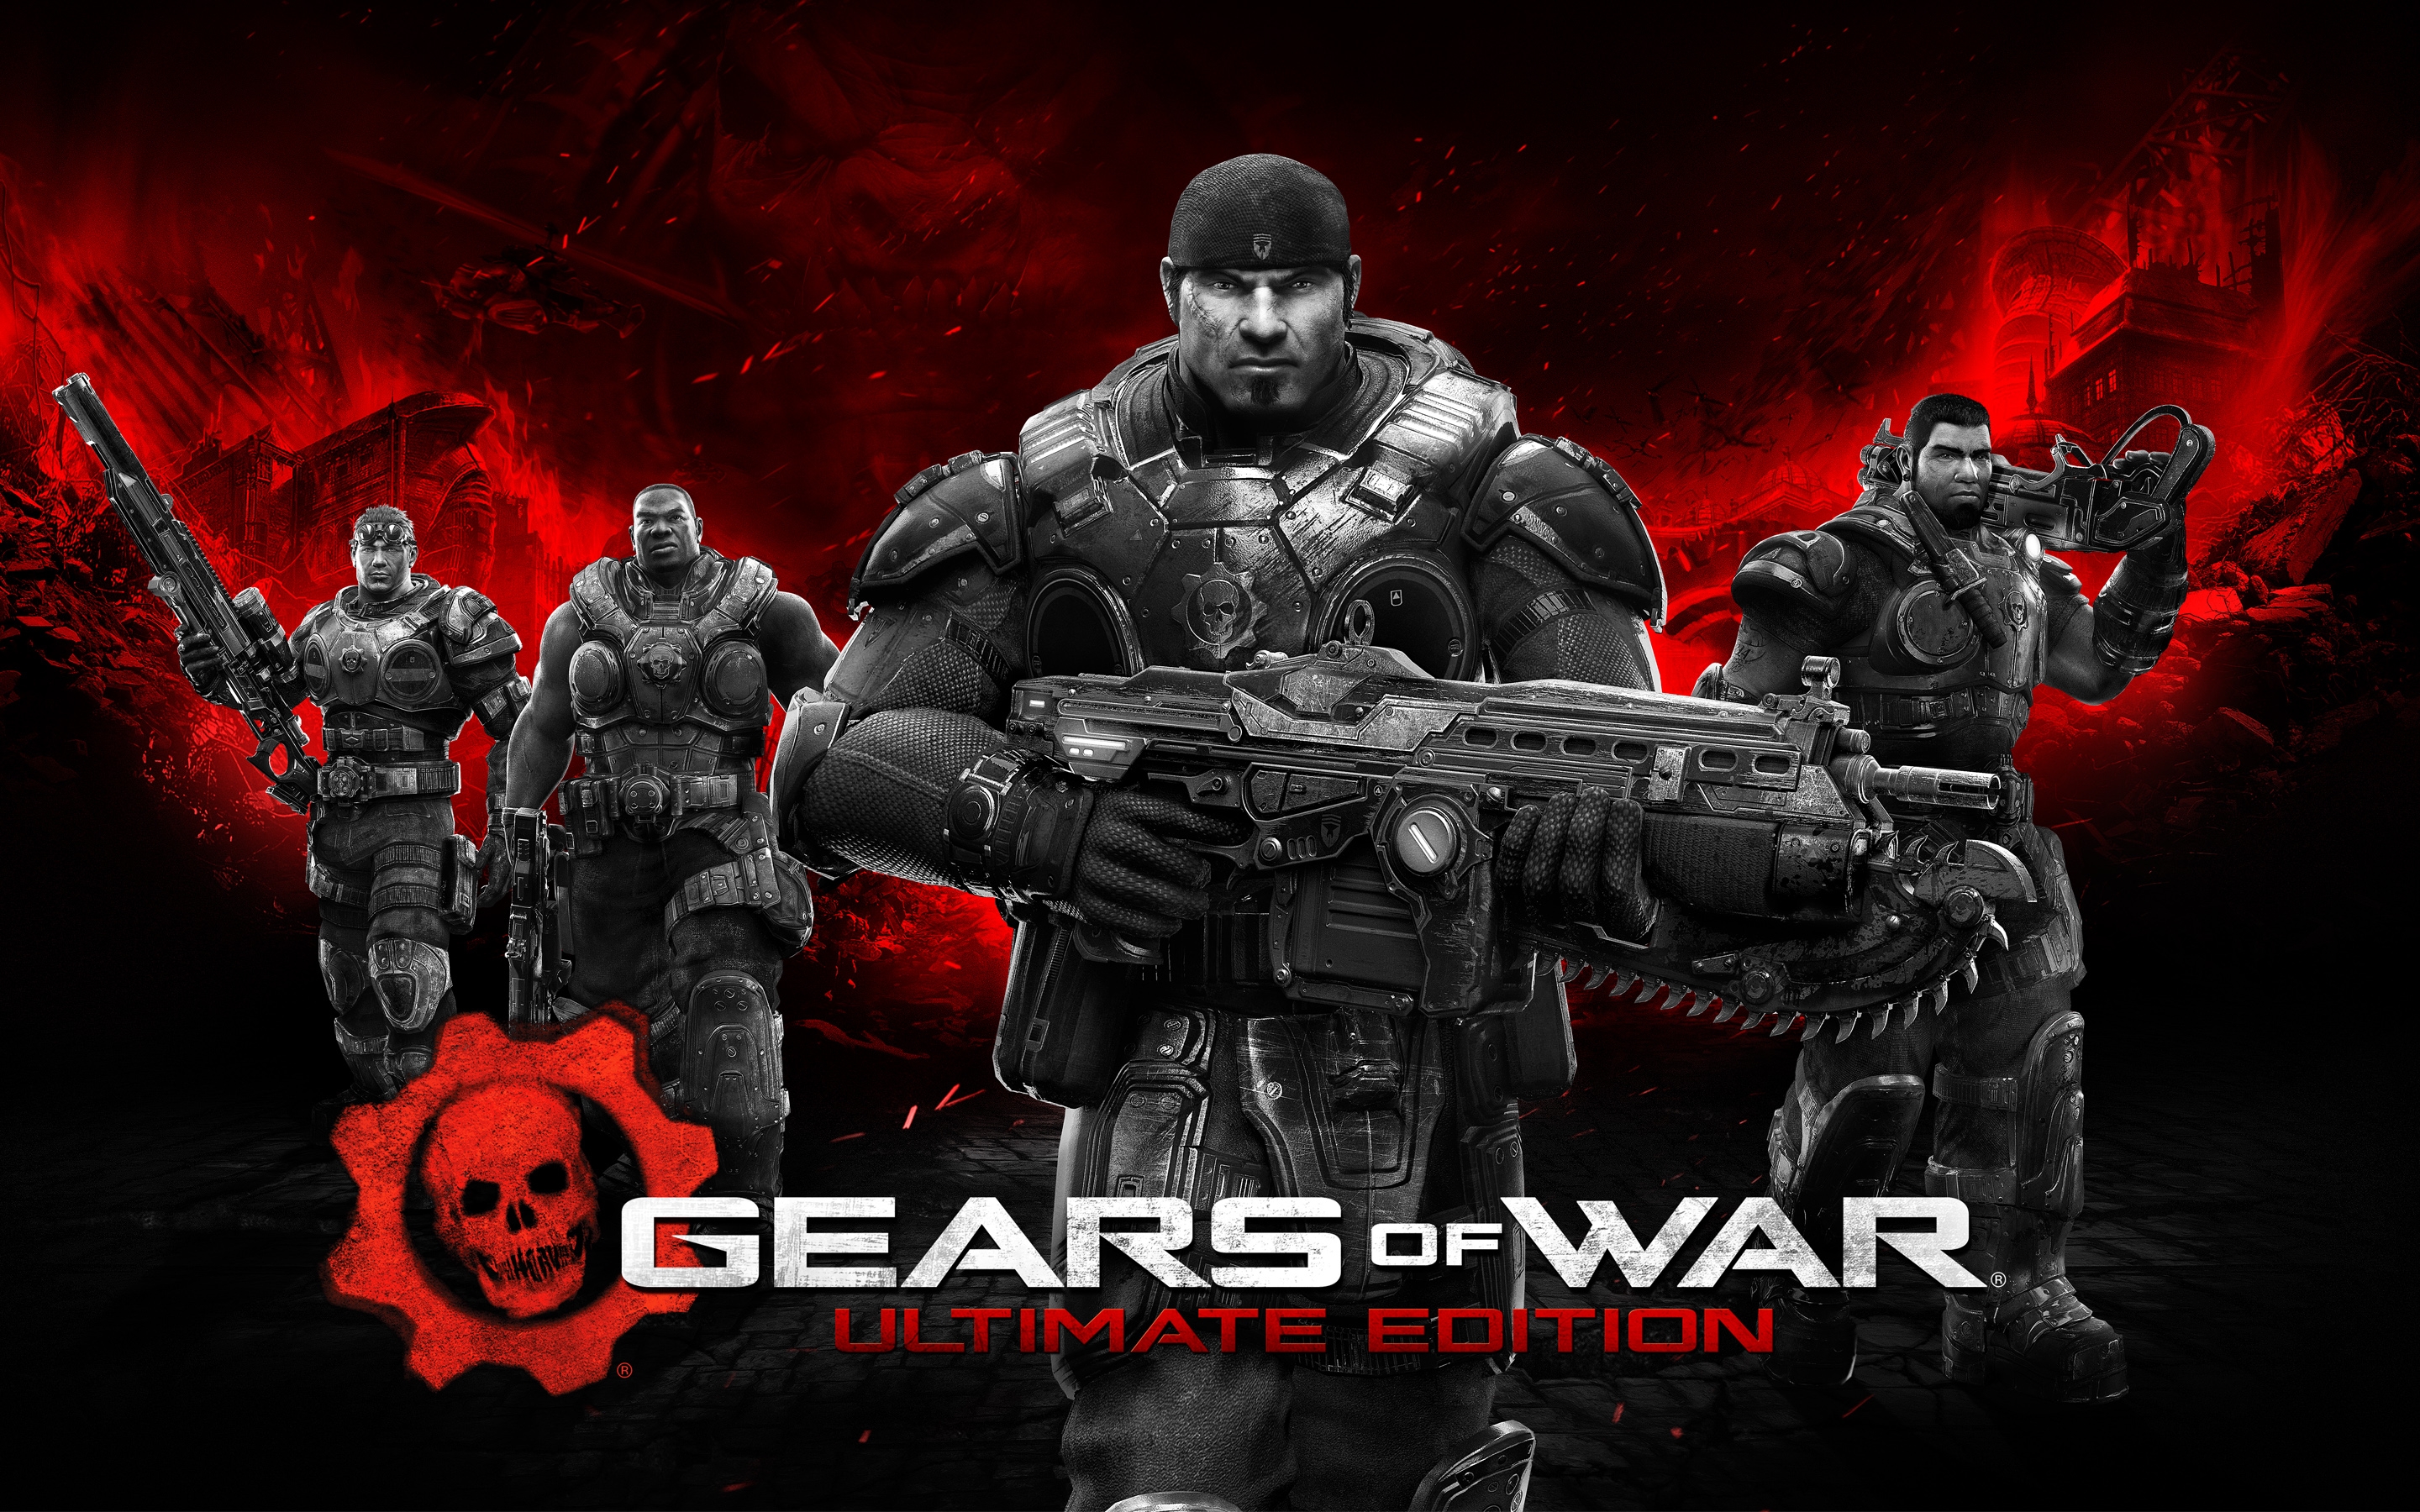 Gears of War: Ultimate Edition Includes The Entire Series